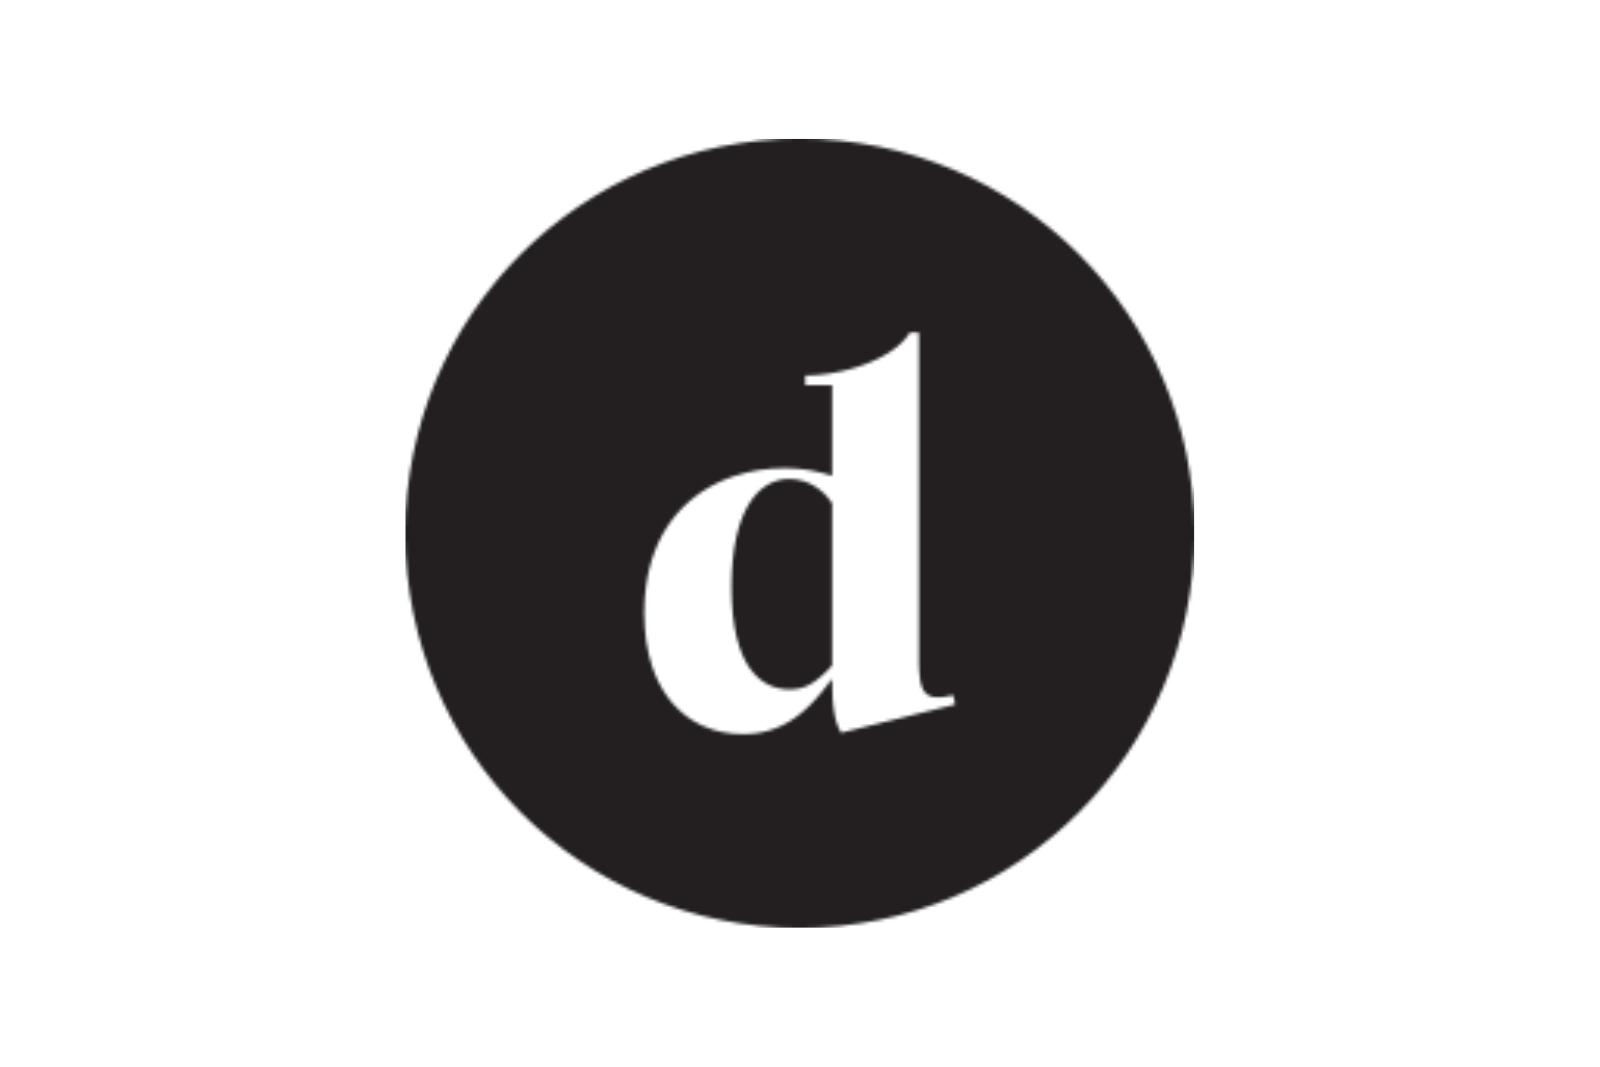 A white lowercase d in the middle of a black circle.